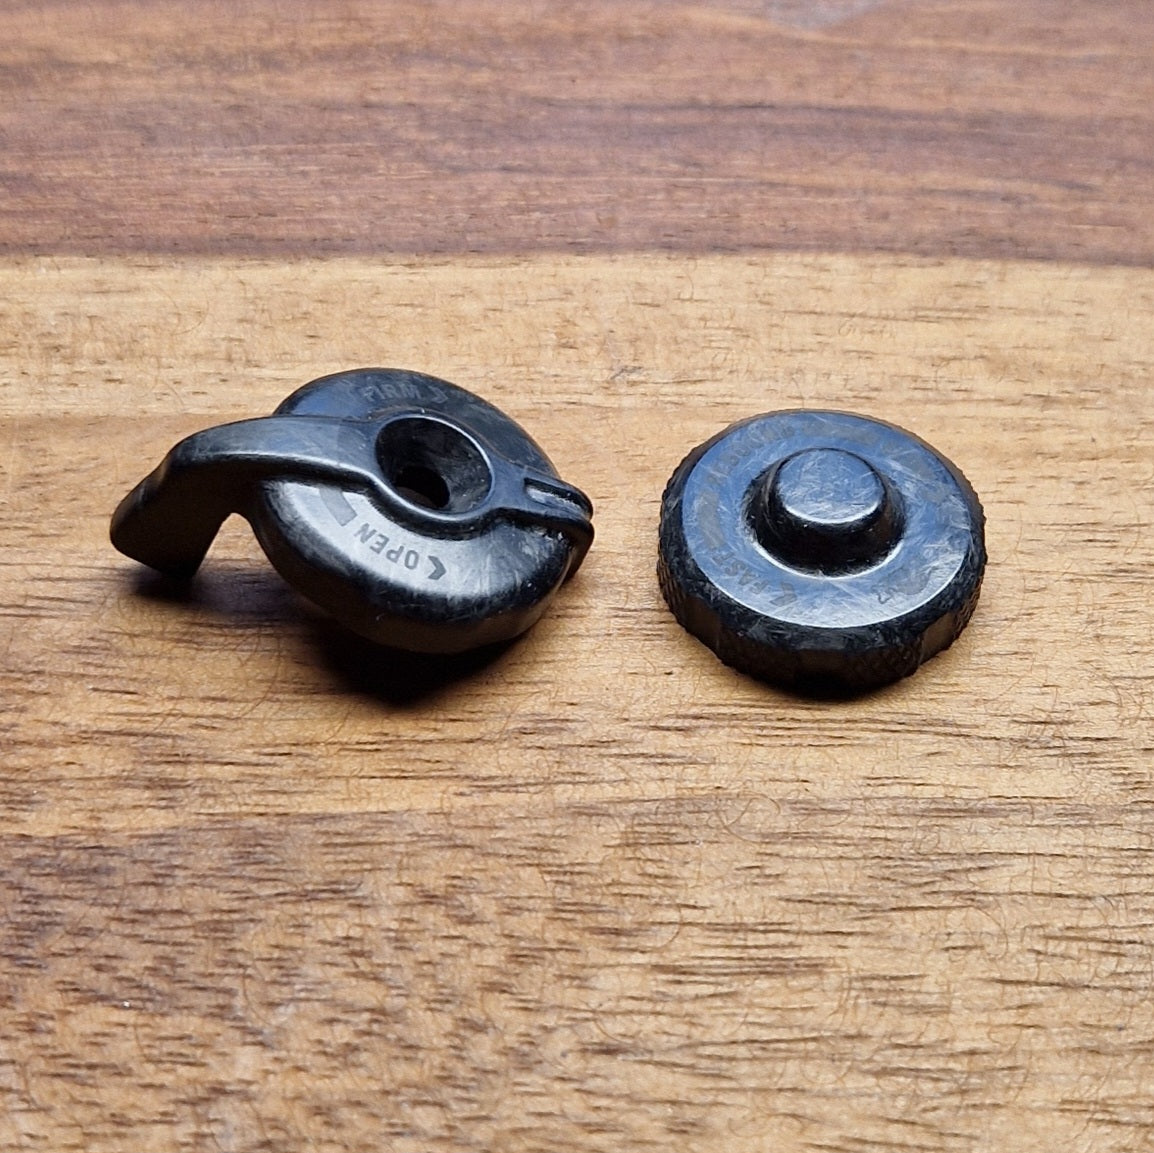 Carbon knobs for the Fox float dpx2 Performance rear shock